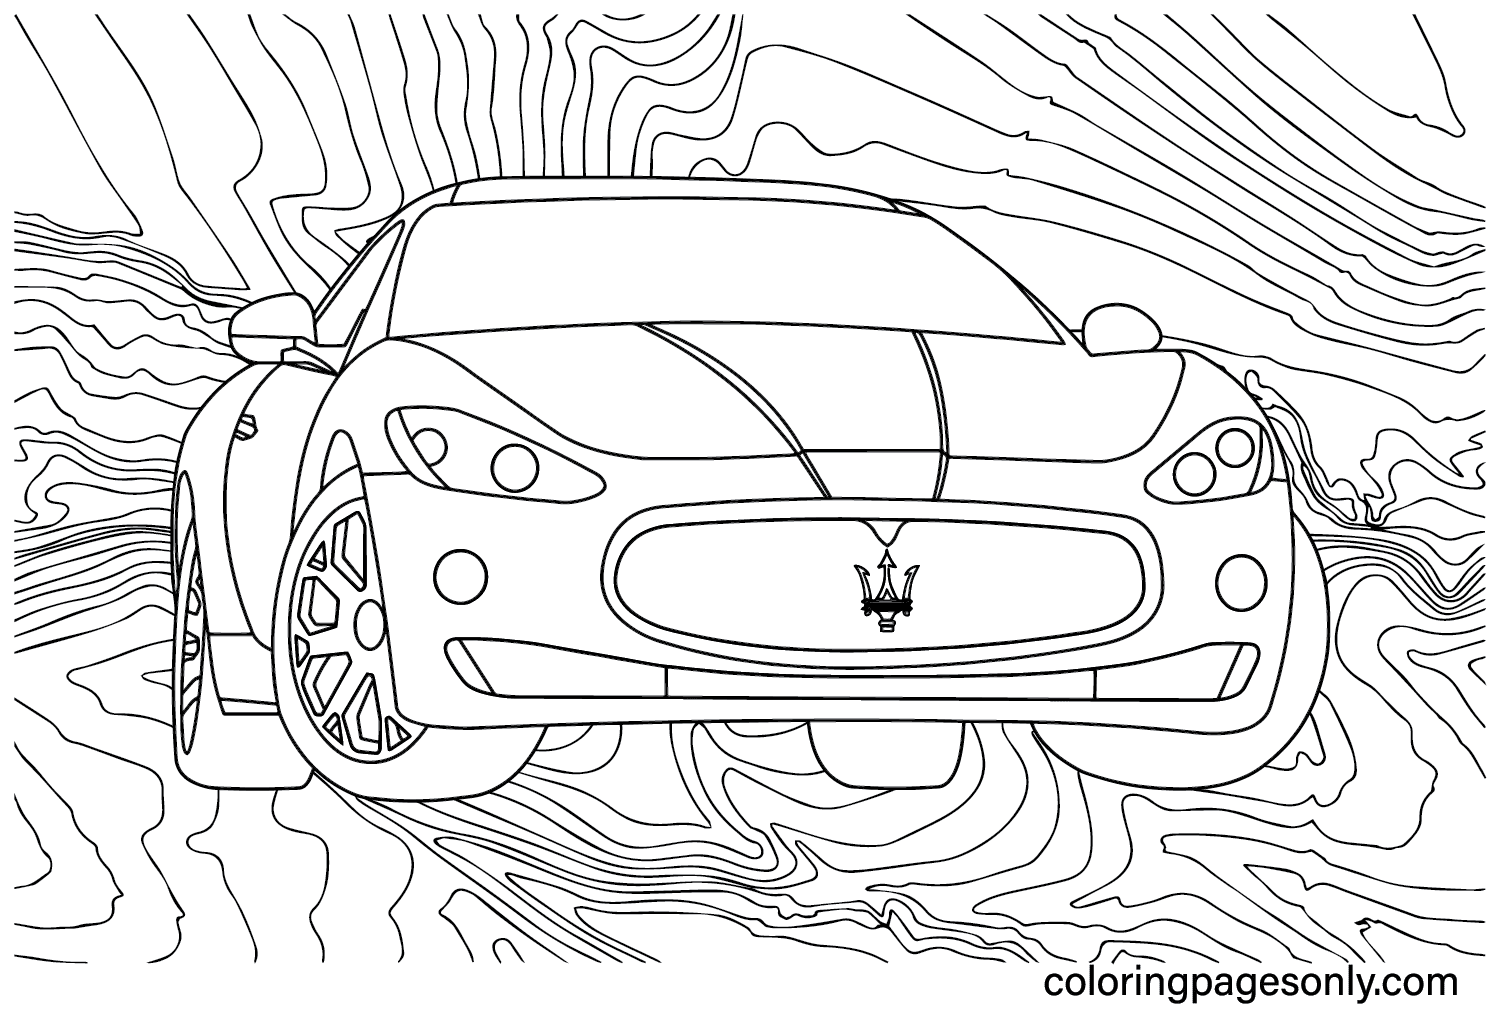 Collection Newest Maserati Coloring Pages Free To Print And Download Shill Art